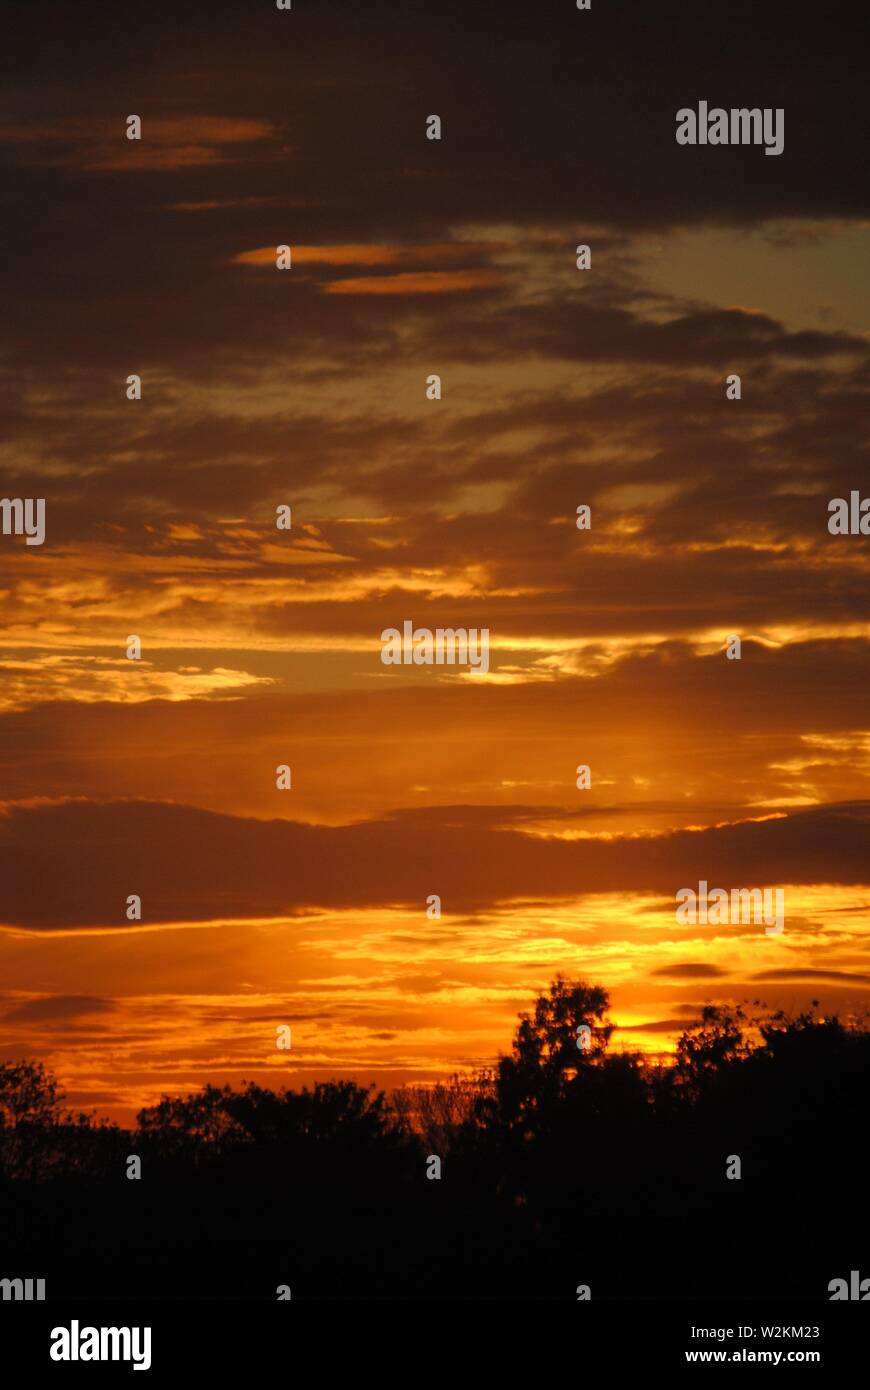 sunset sequence golden glow with lots of clouds with tree silhouettes Stock Photo